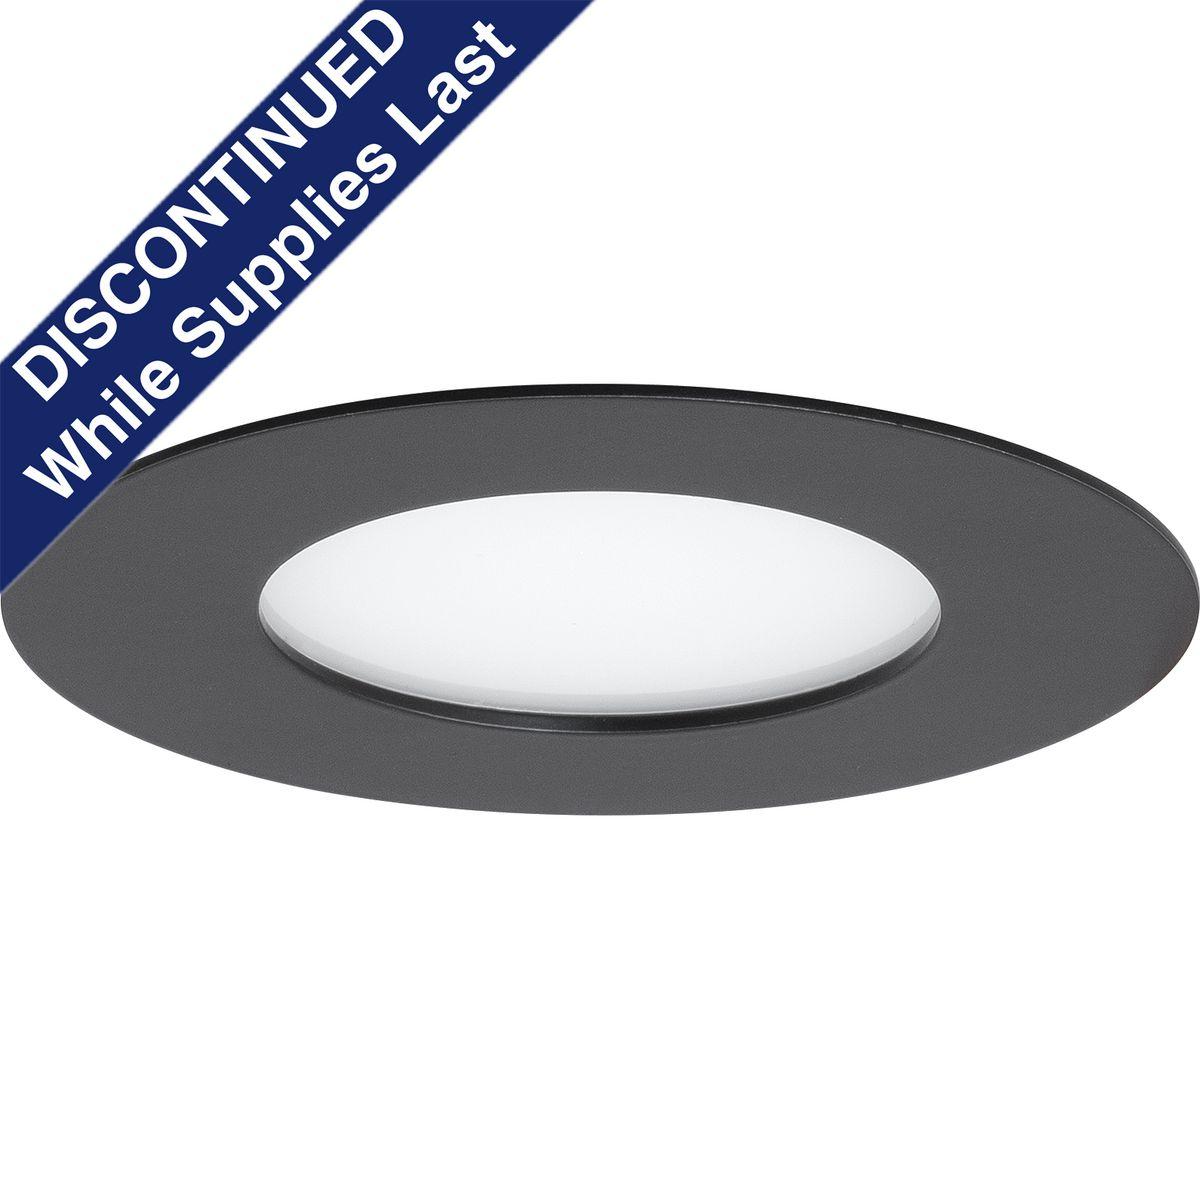 Hubbell P800004-031-30 5" Slim, low profile recessed downlight combines innovative technology, aesthetics, functionality and affordability. No housing or J-Box required for installation and wet location listed provides the ultimate flexibility. The low profile downlight is idea